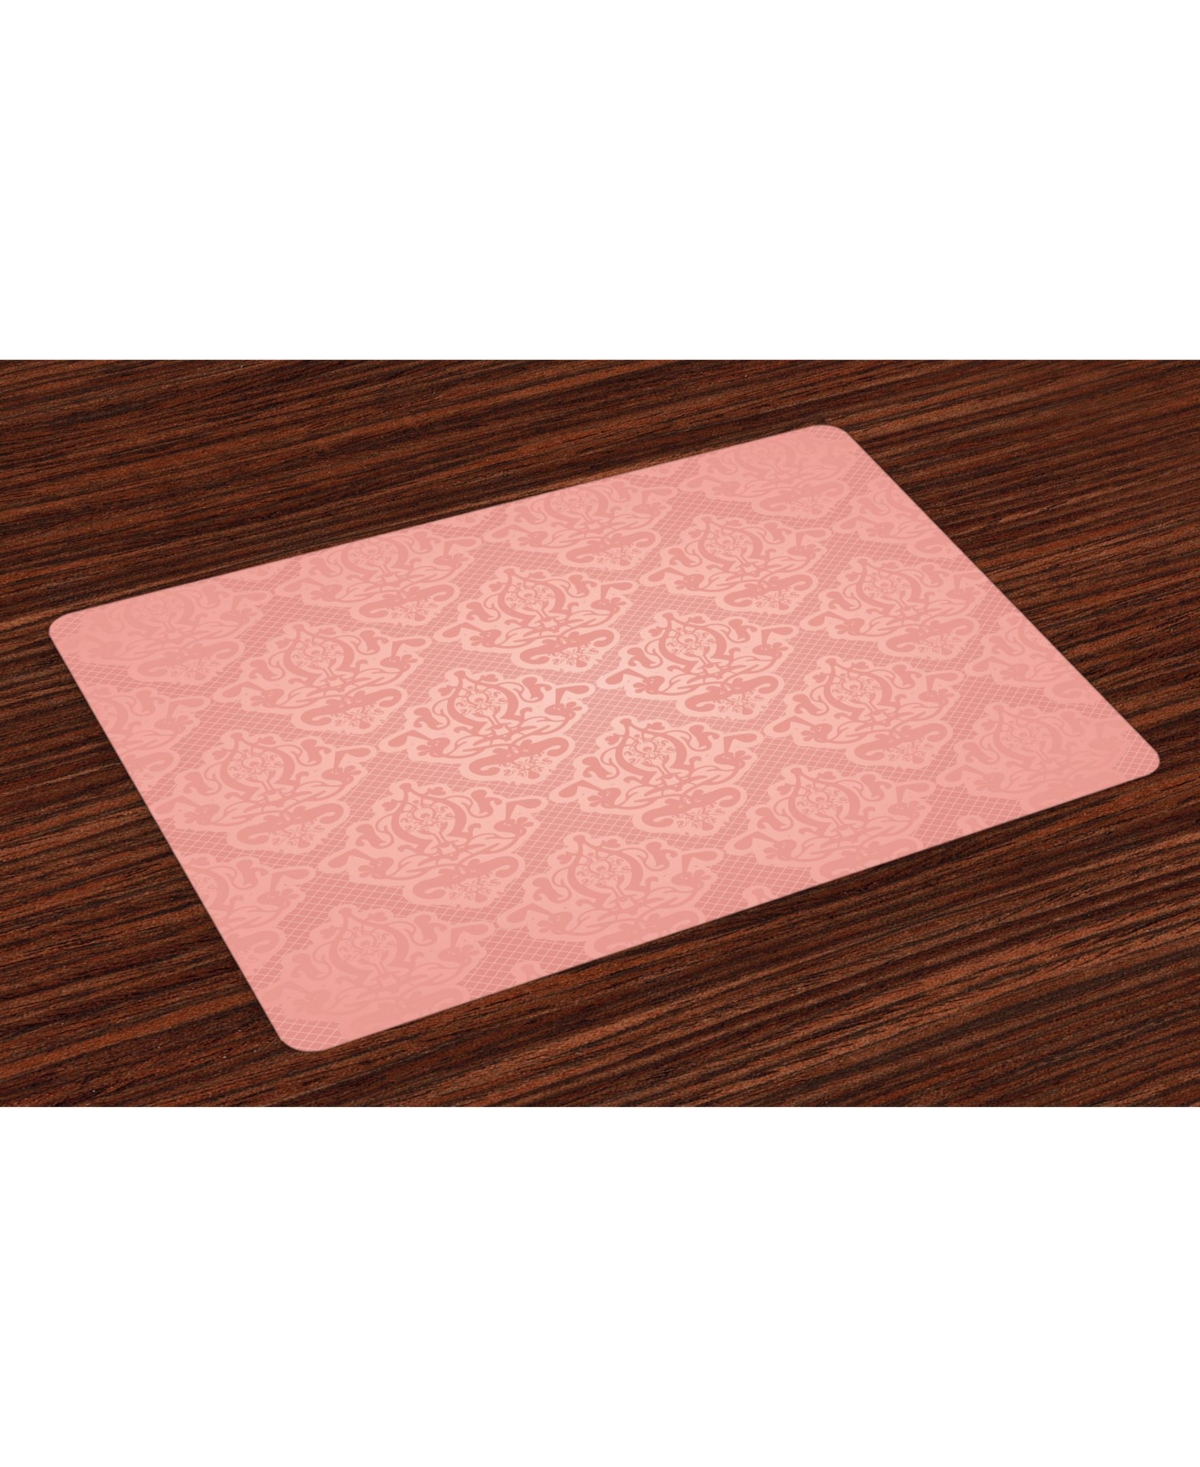 AMBESONNE PEACH PLACE MATS, SET OF 4